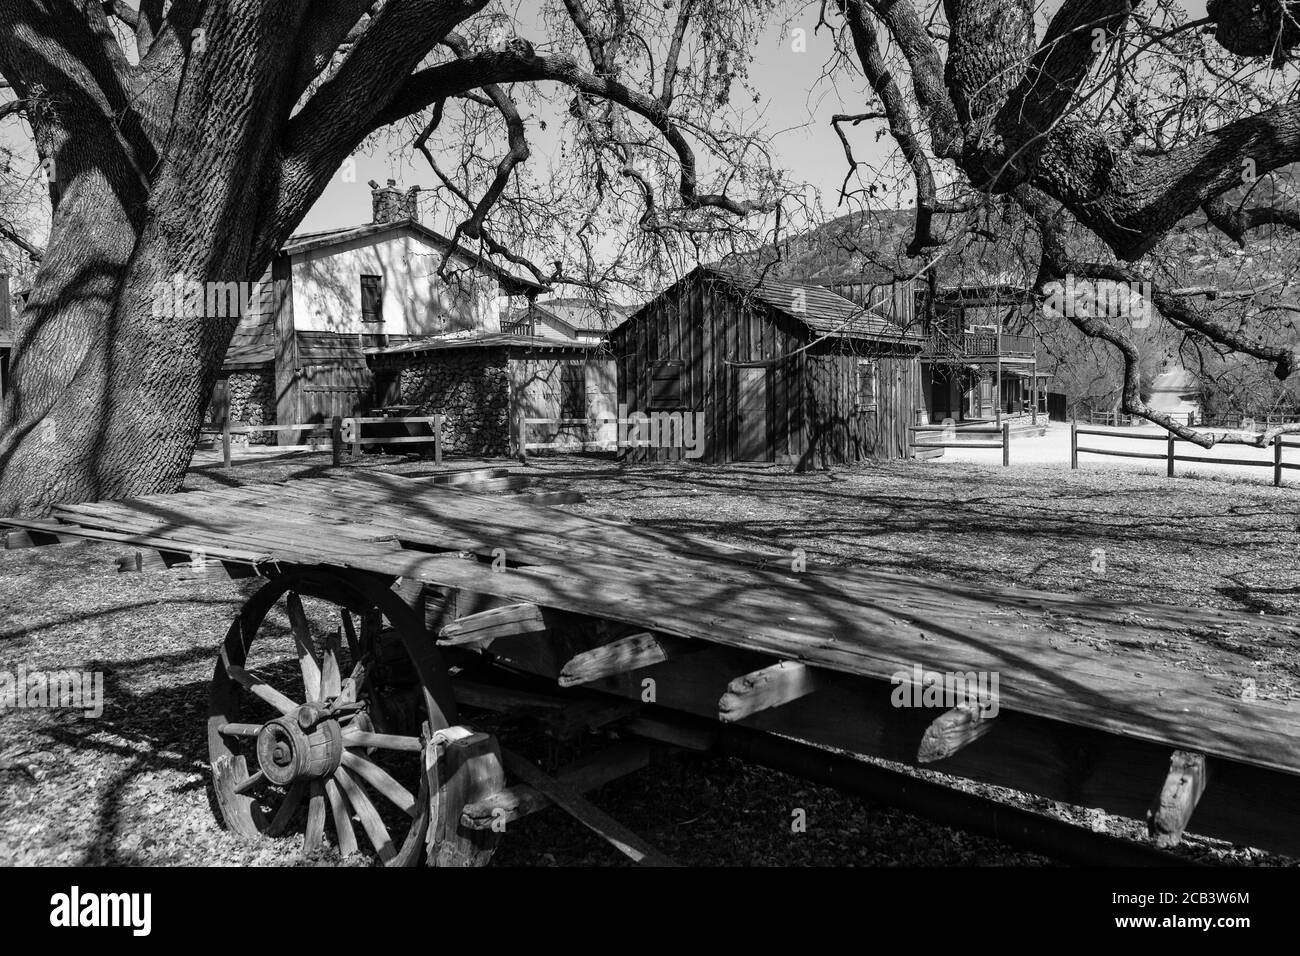 Black and white view of historic movie set buildings in the Santa Monica Mountains National Recreation Area, Paramount Ranch site near Los Angeles Cal Stock Photo